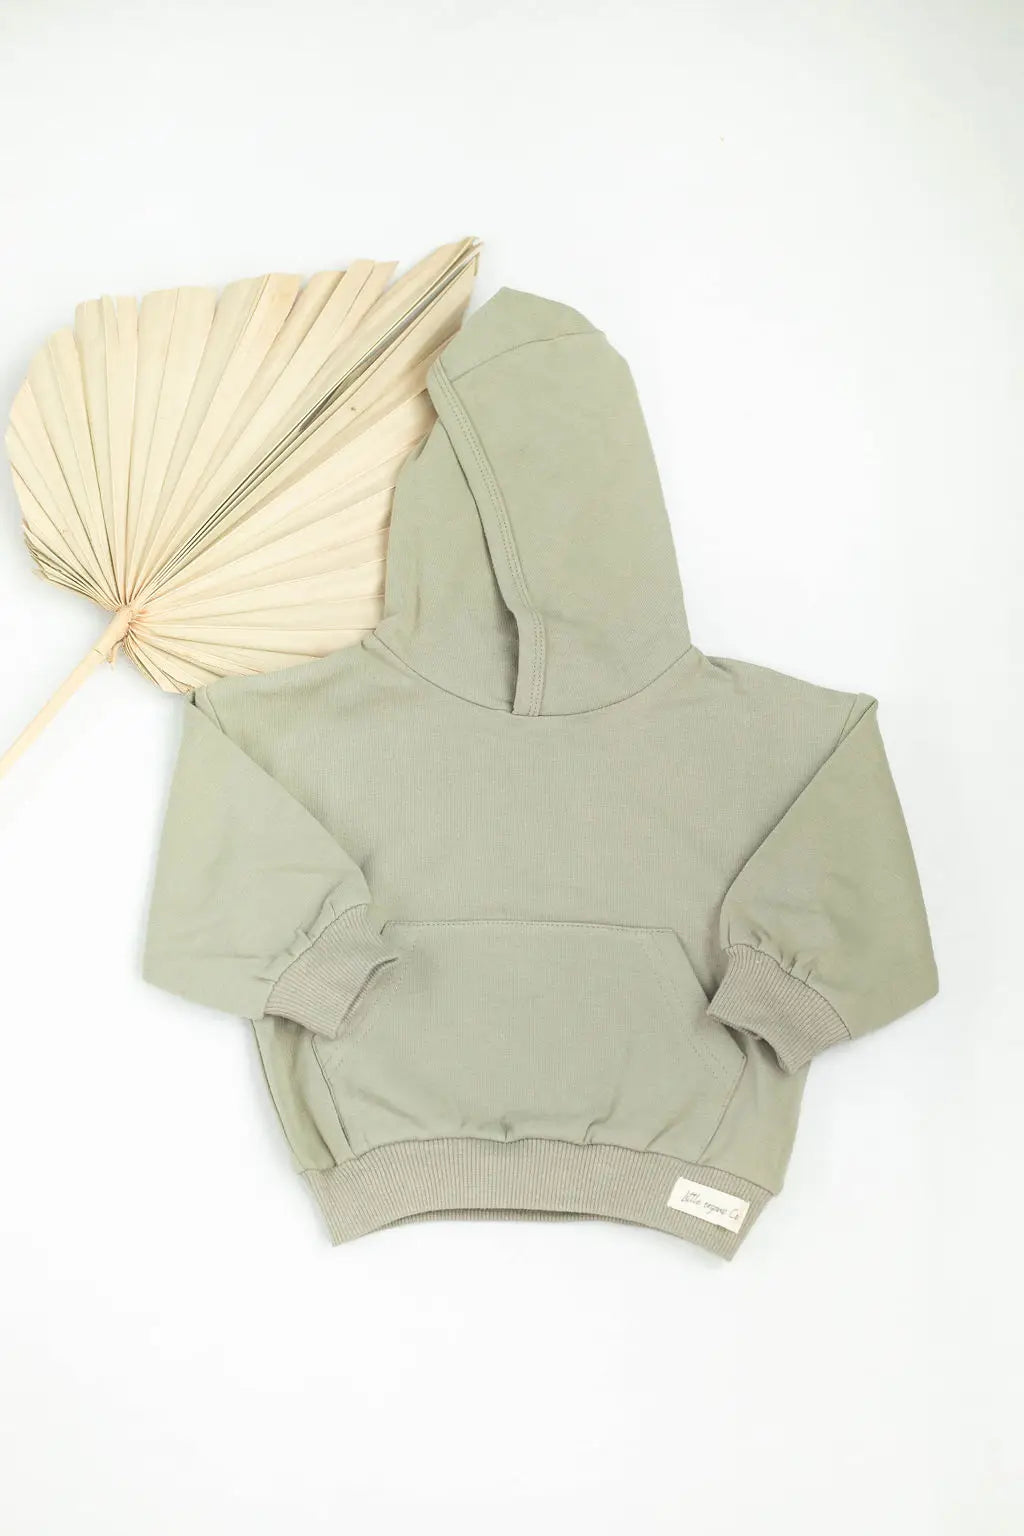 Hoodies for babies and toddlers organic french terry -sage